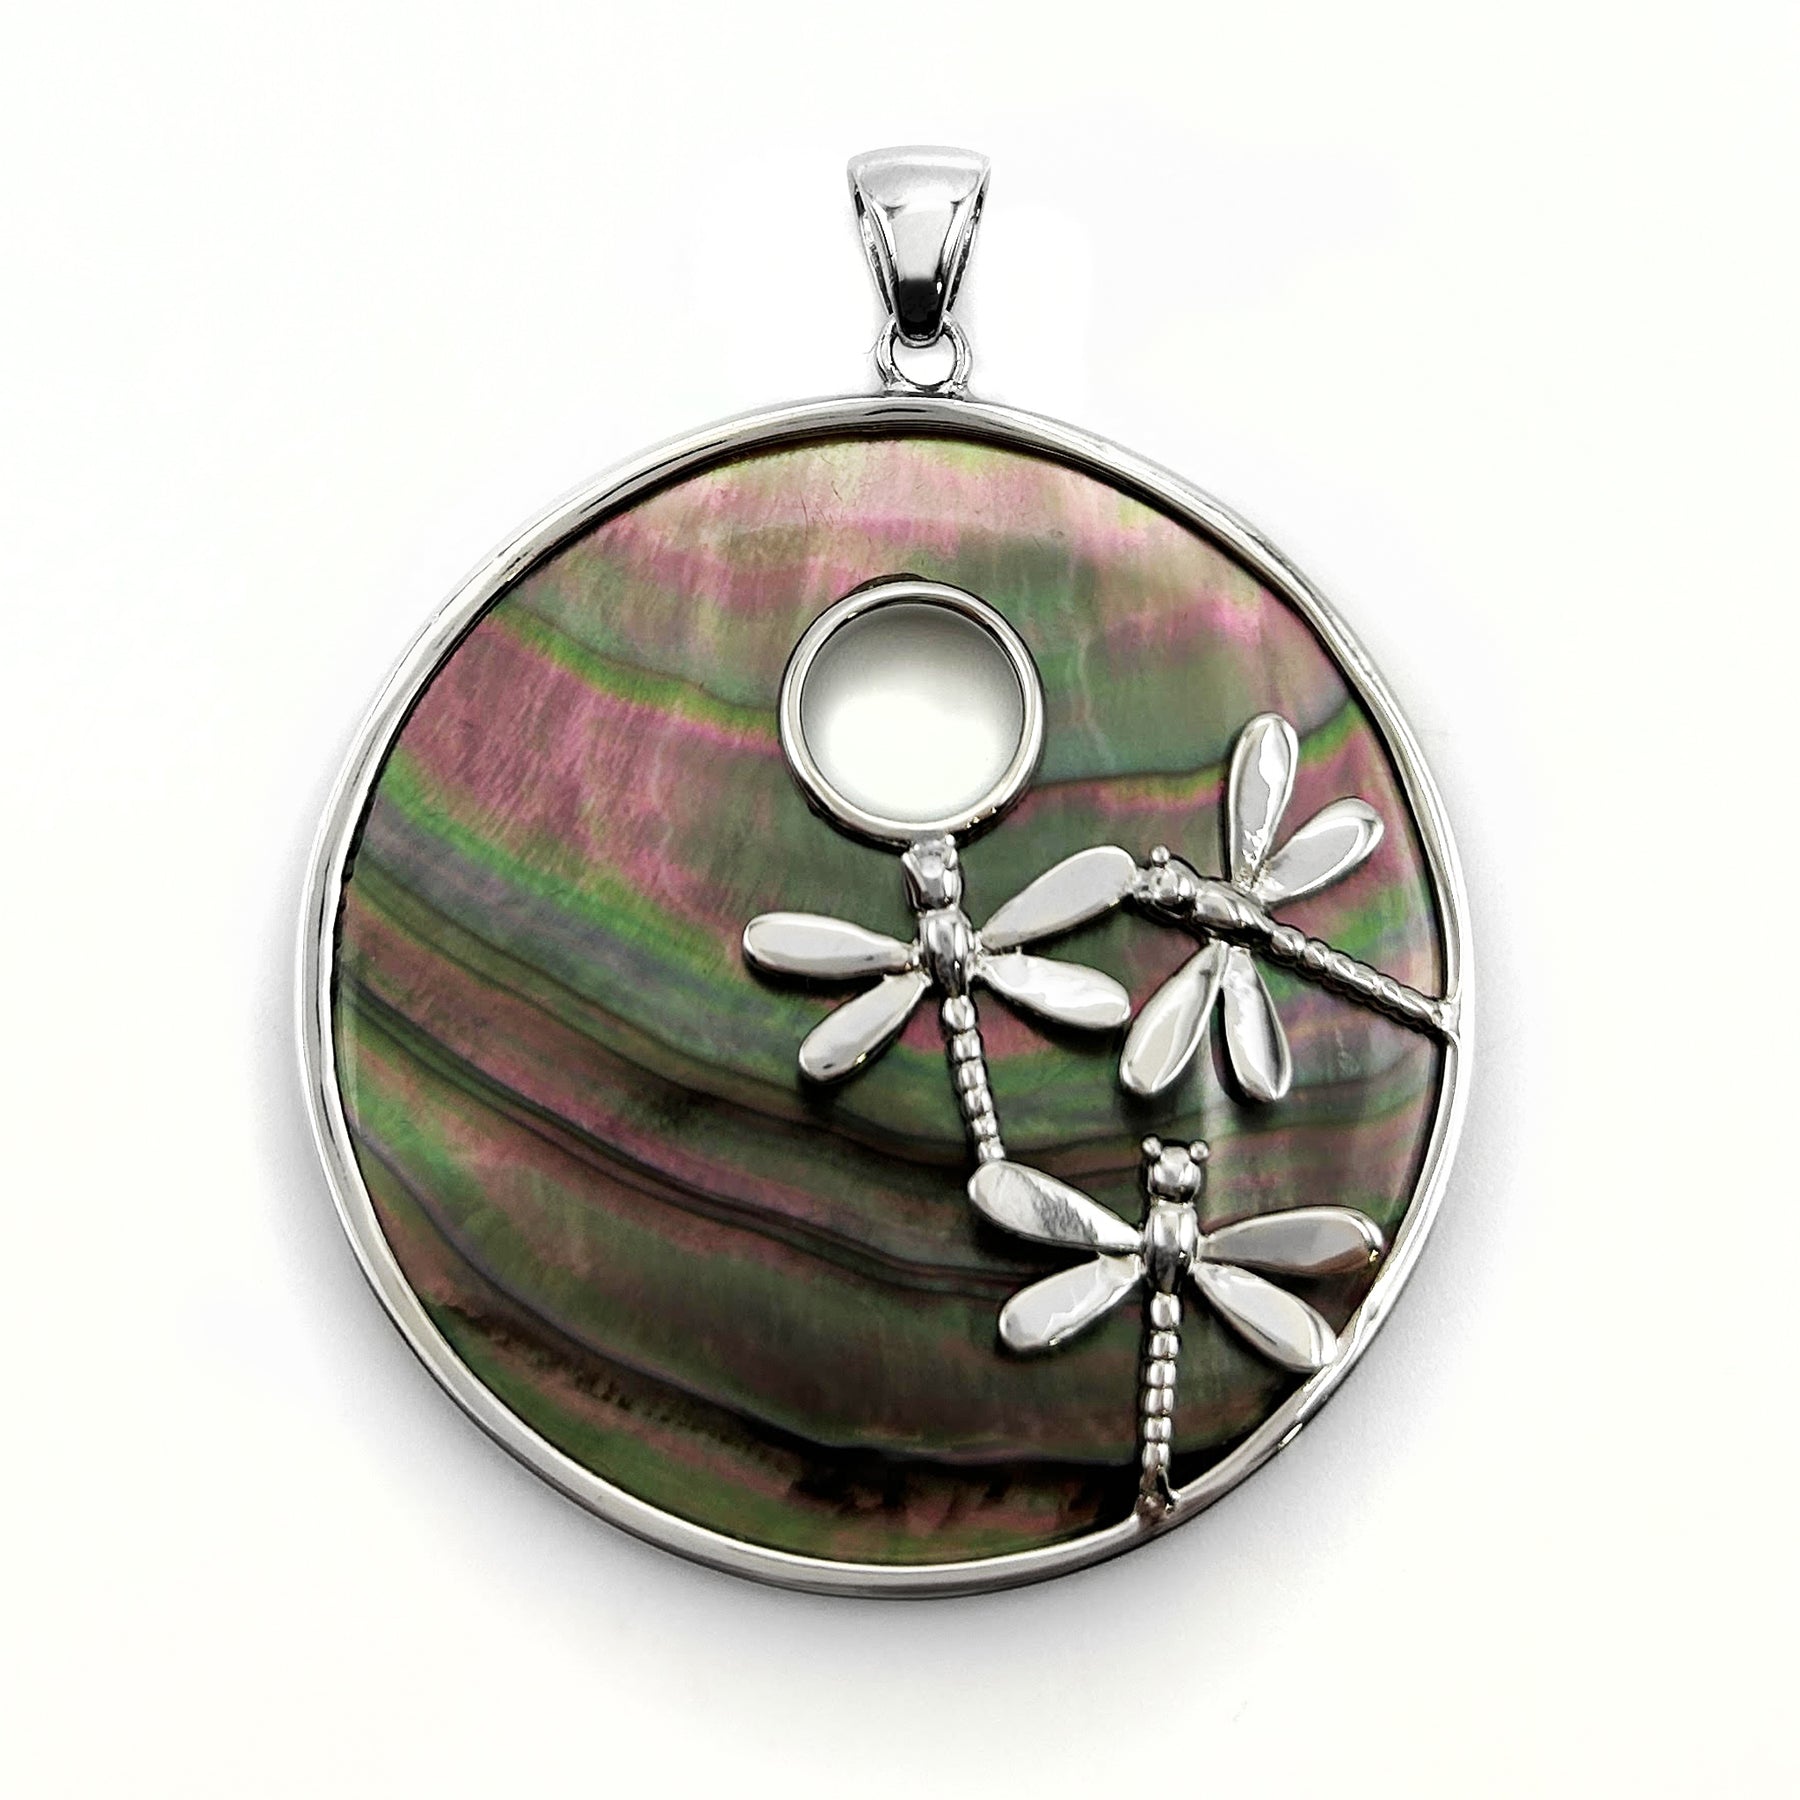 Black Mother of Pearl Dragonflies Pendant